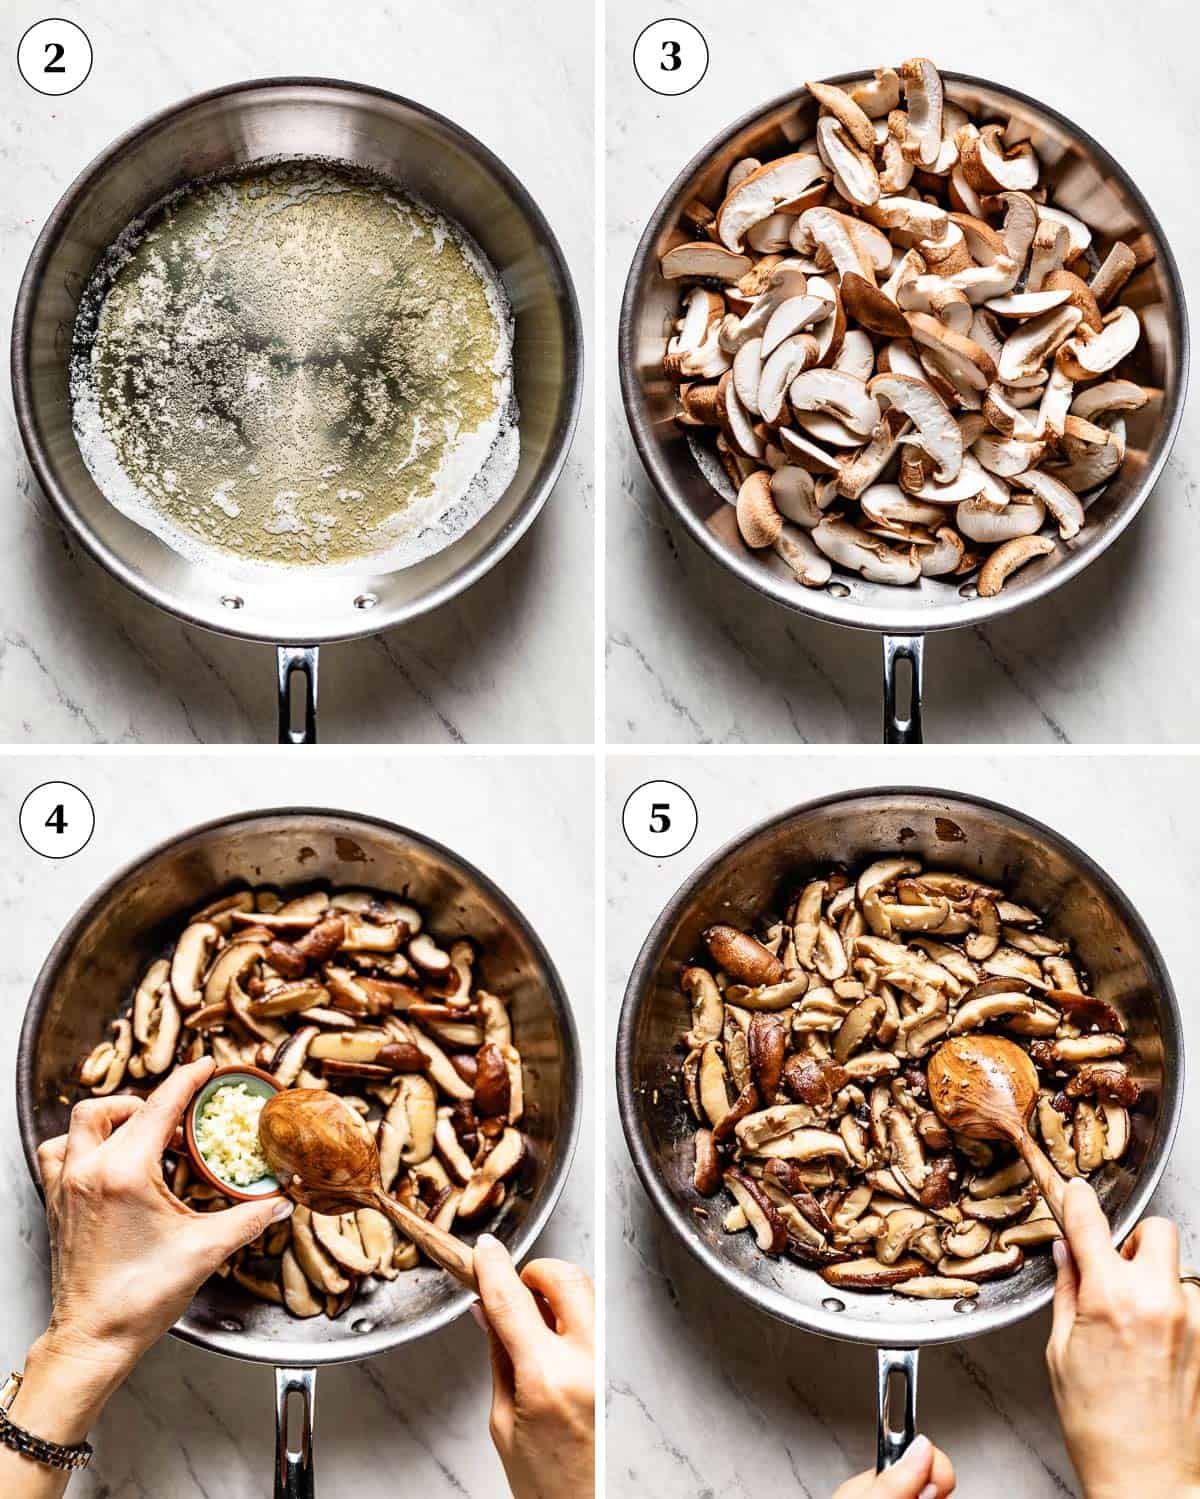 A collage of images showing how to cook shiitake mushrooms.